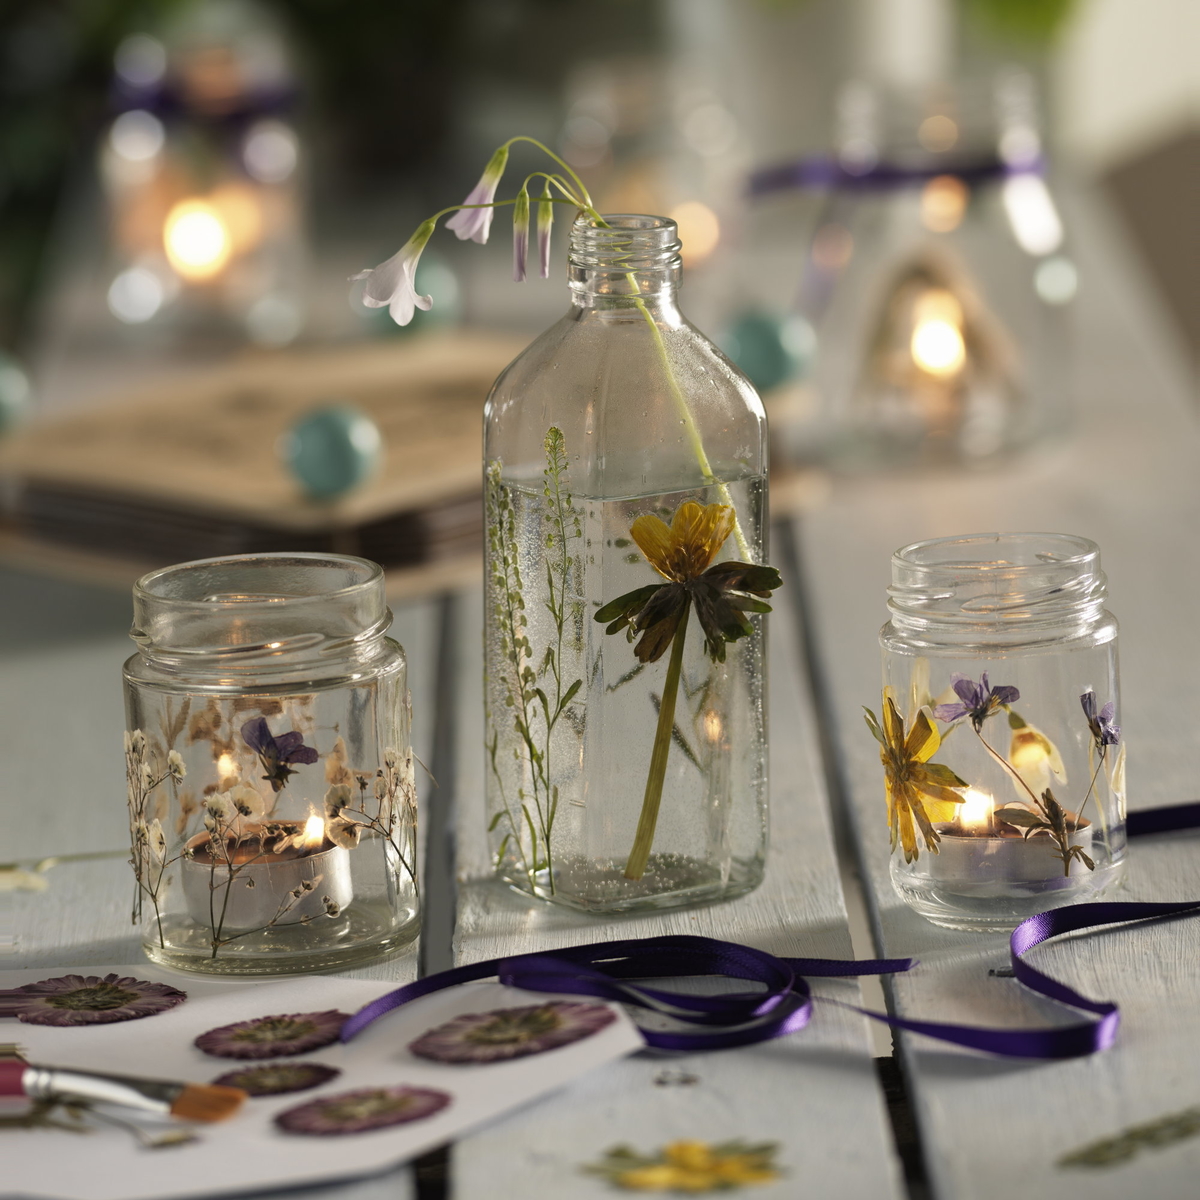 Decorate with dried flowers